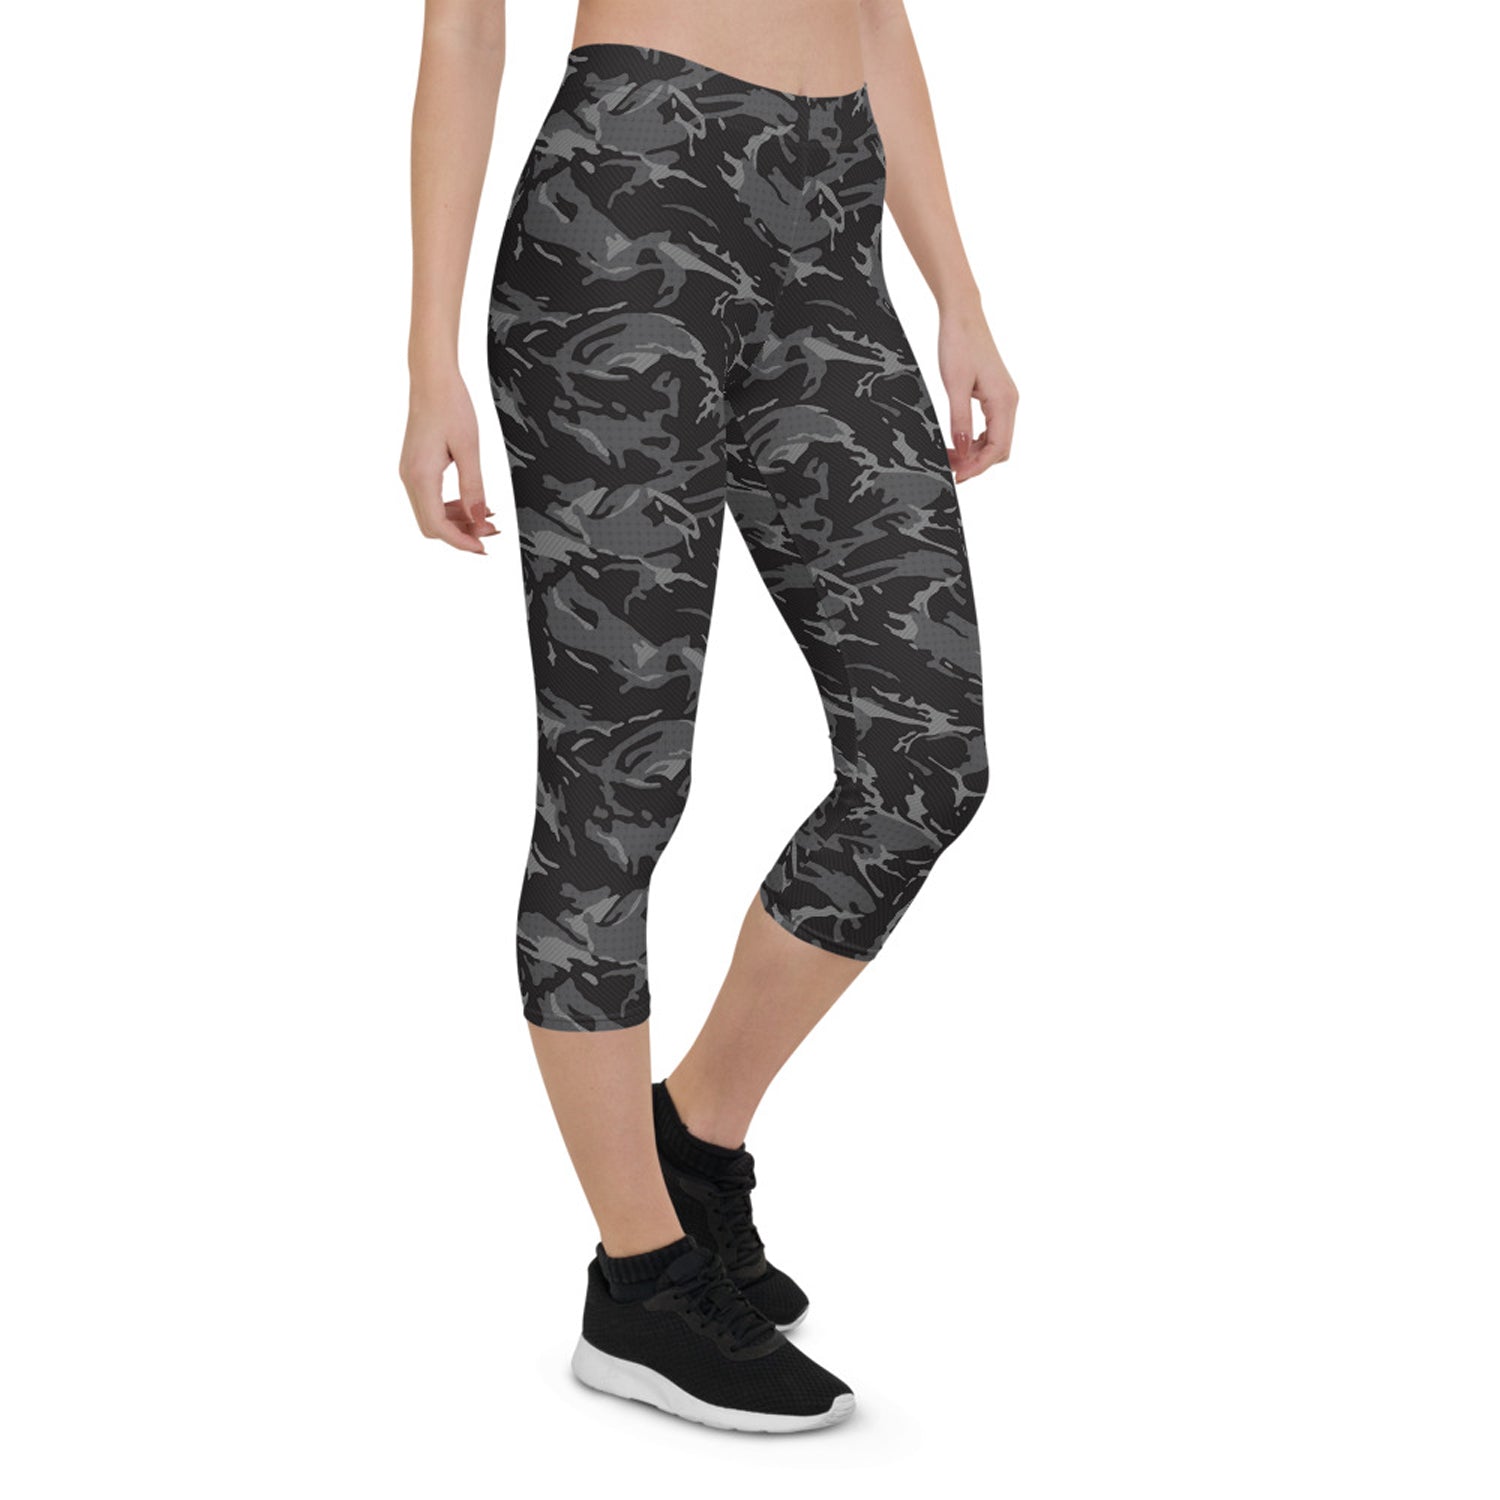 Women's Camouflage Print Red and Black Capri Leggings Y6677 – One Size Fits